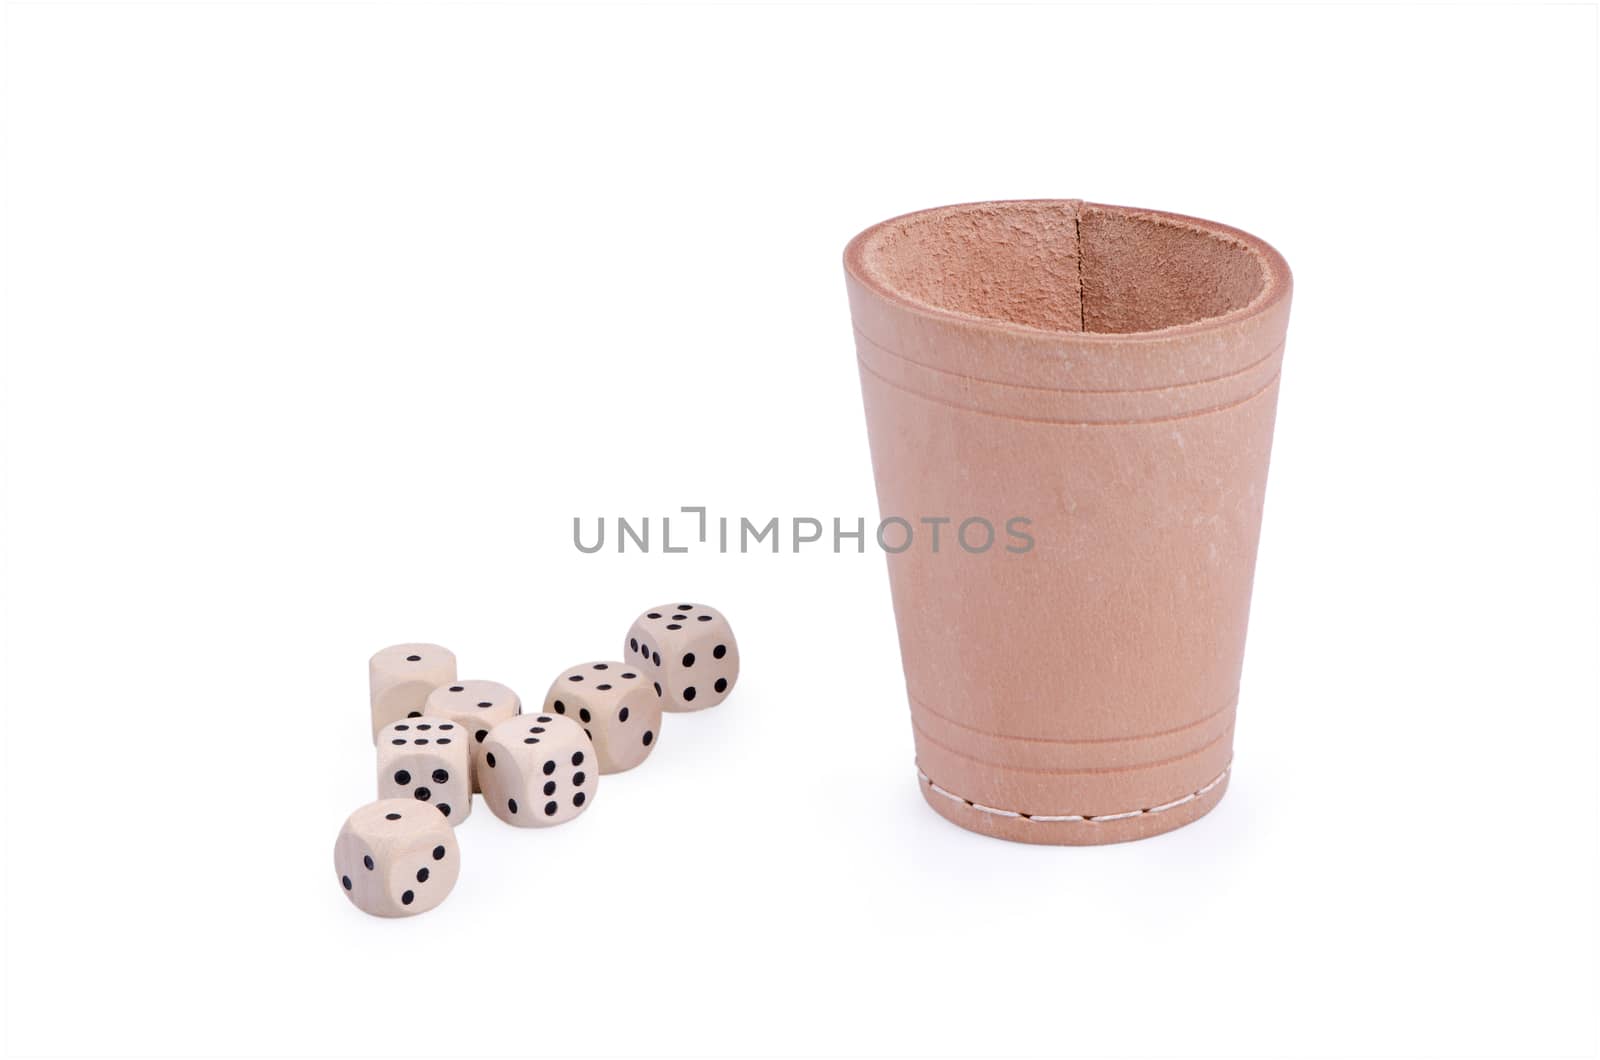 Seven wooden dice and leather pot isolated on white background.